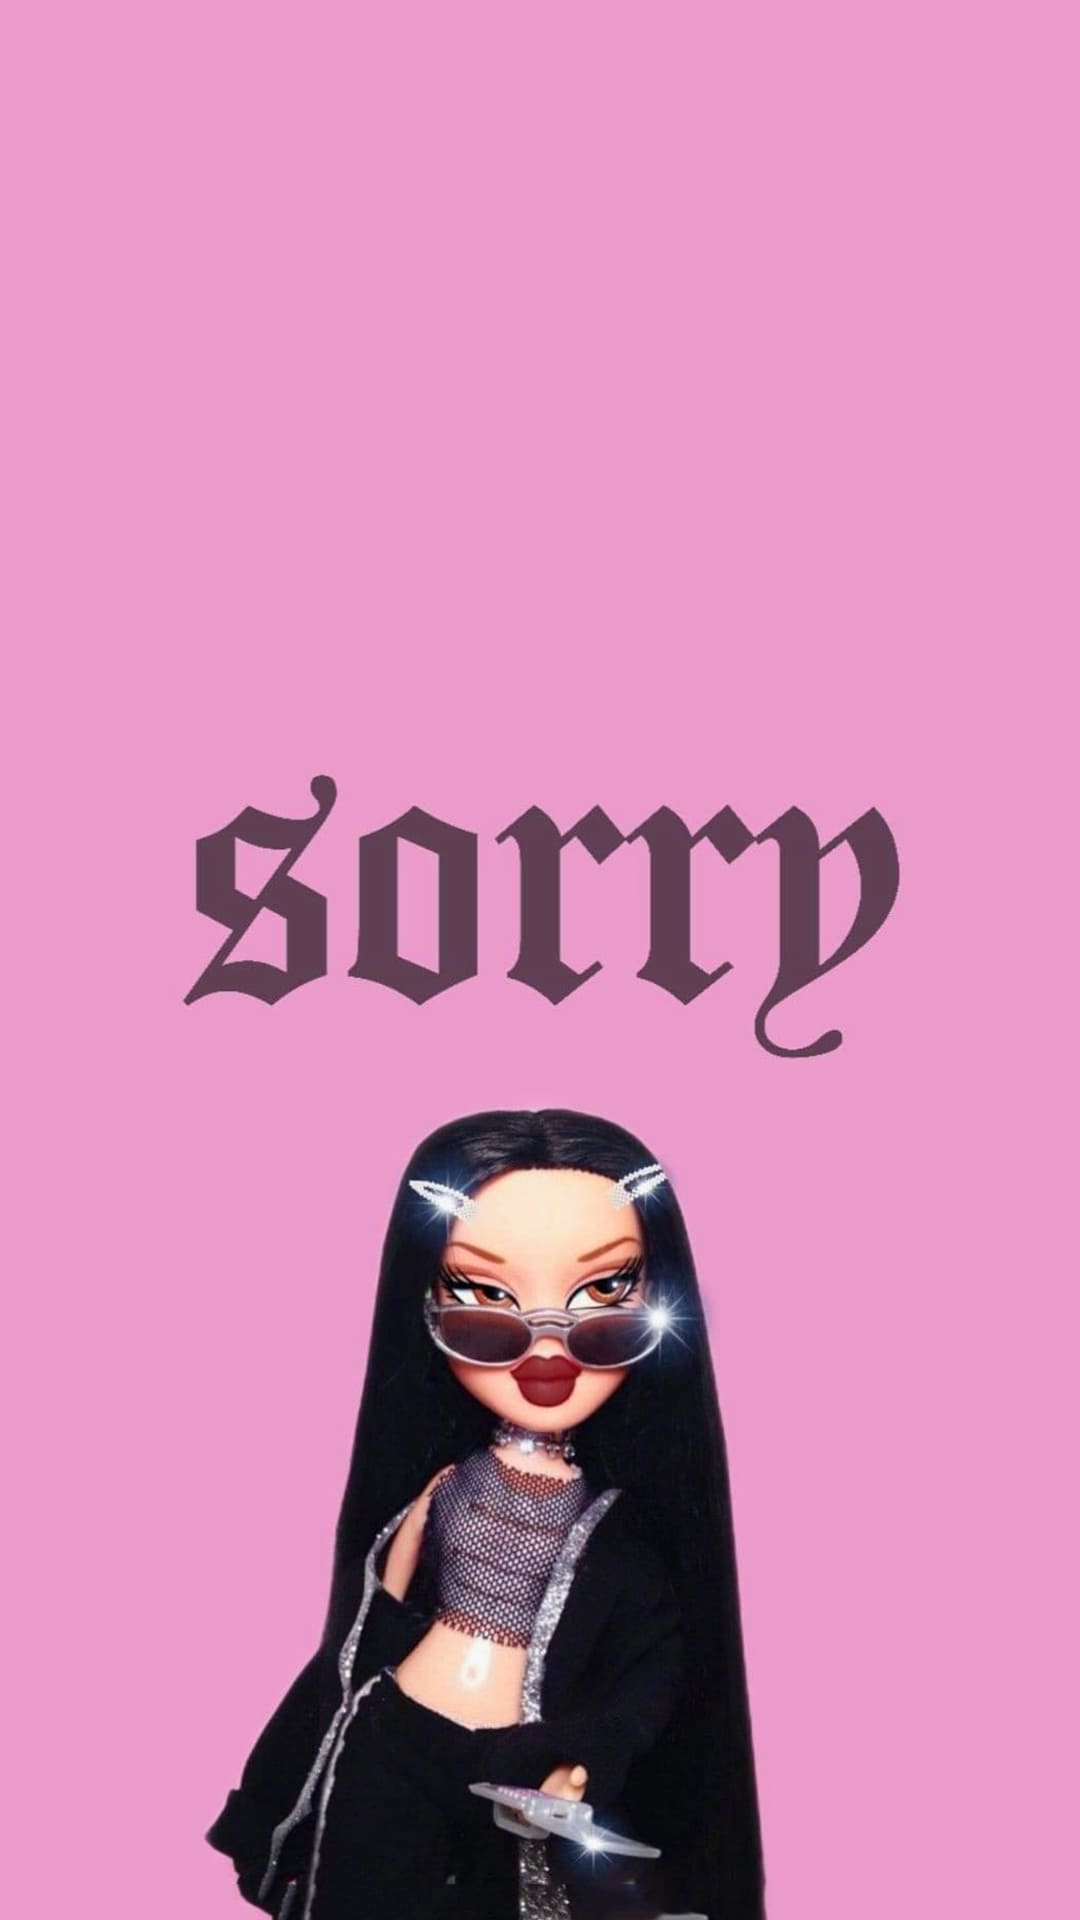 Bratz Aesthetic wallpaper by SmileyProfile  Download on ZEDGE  8bfb